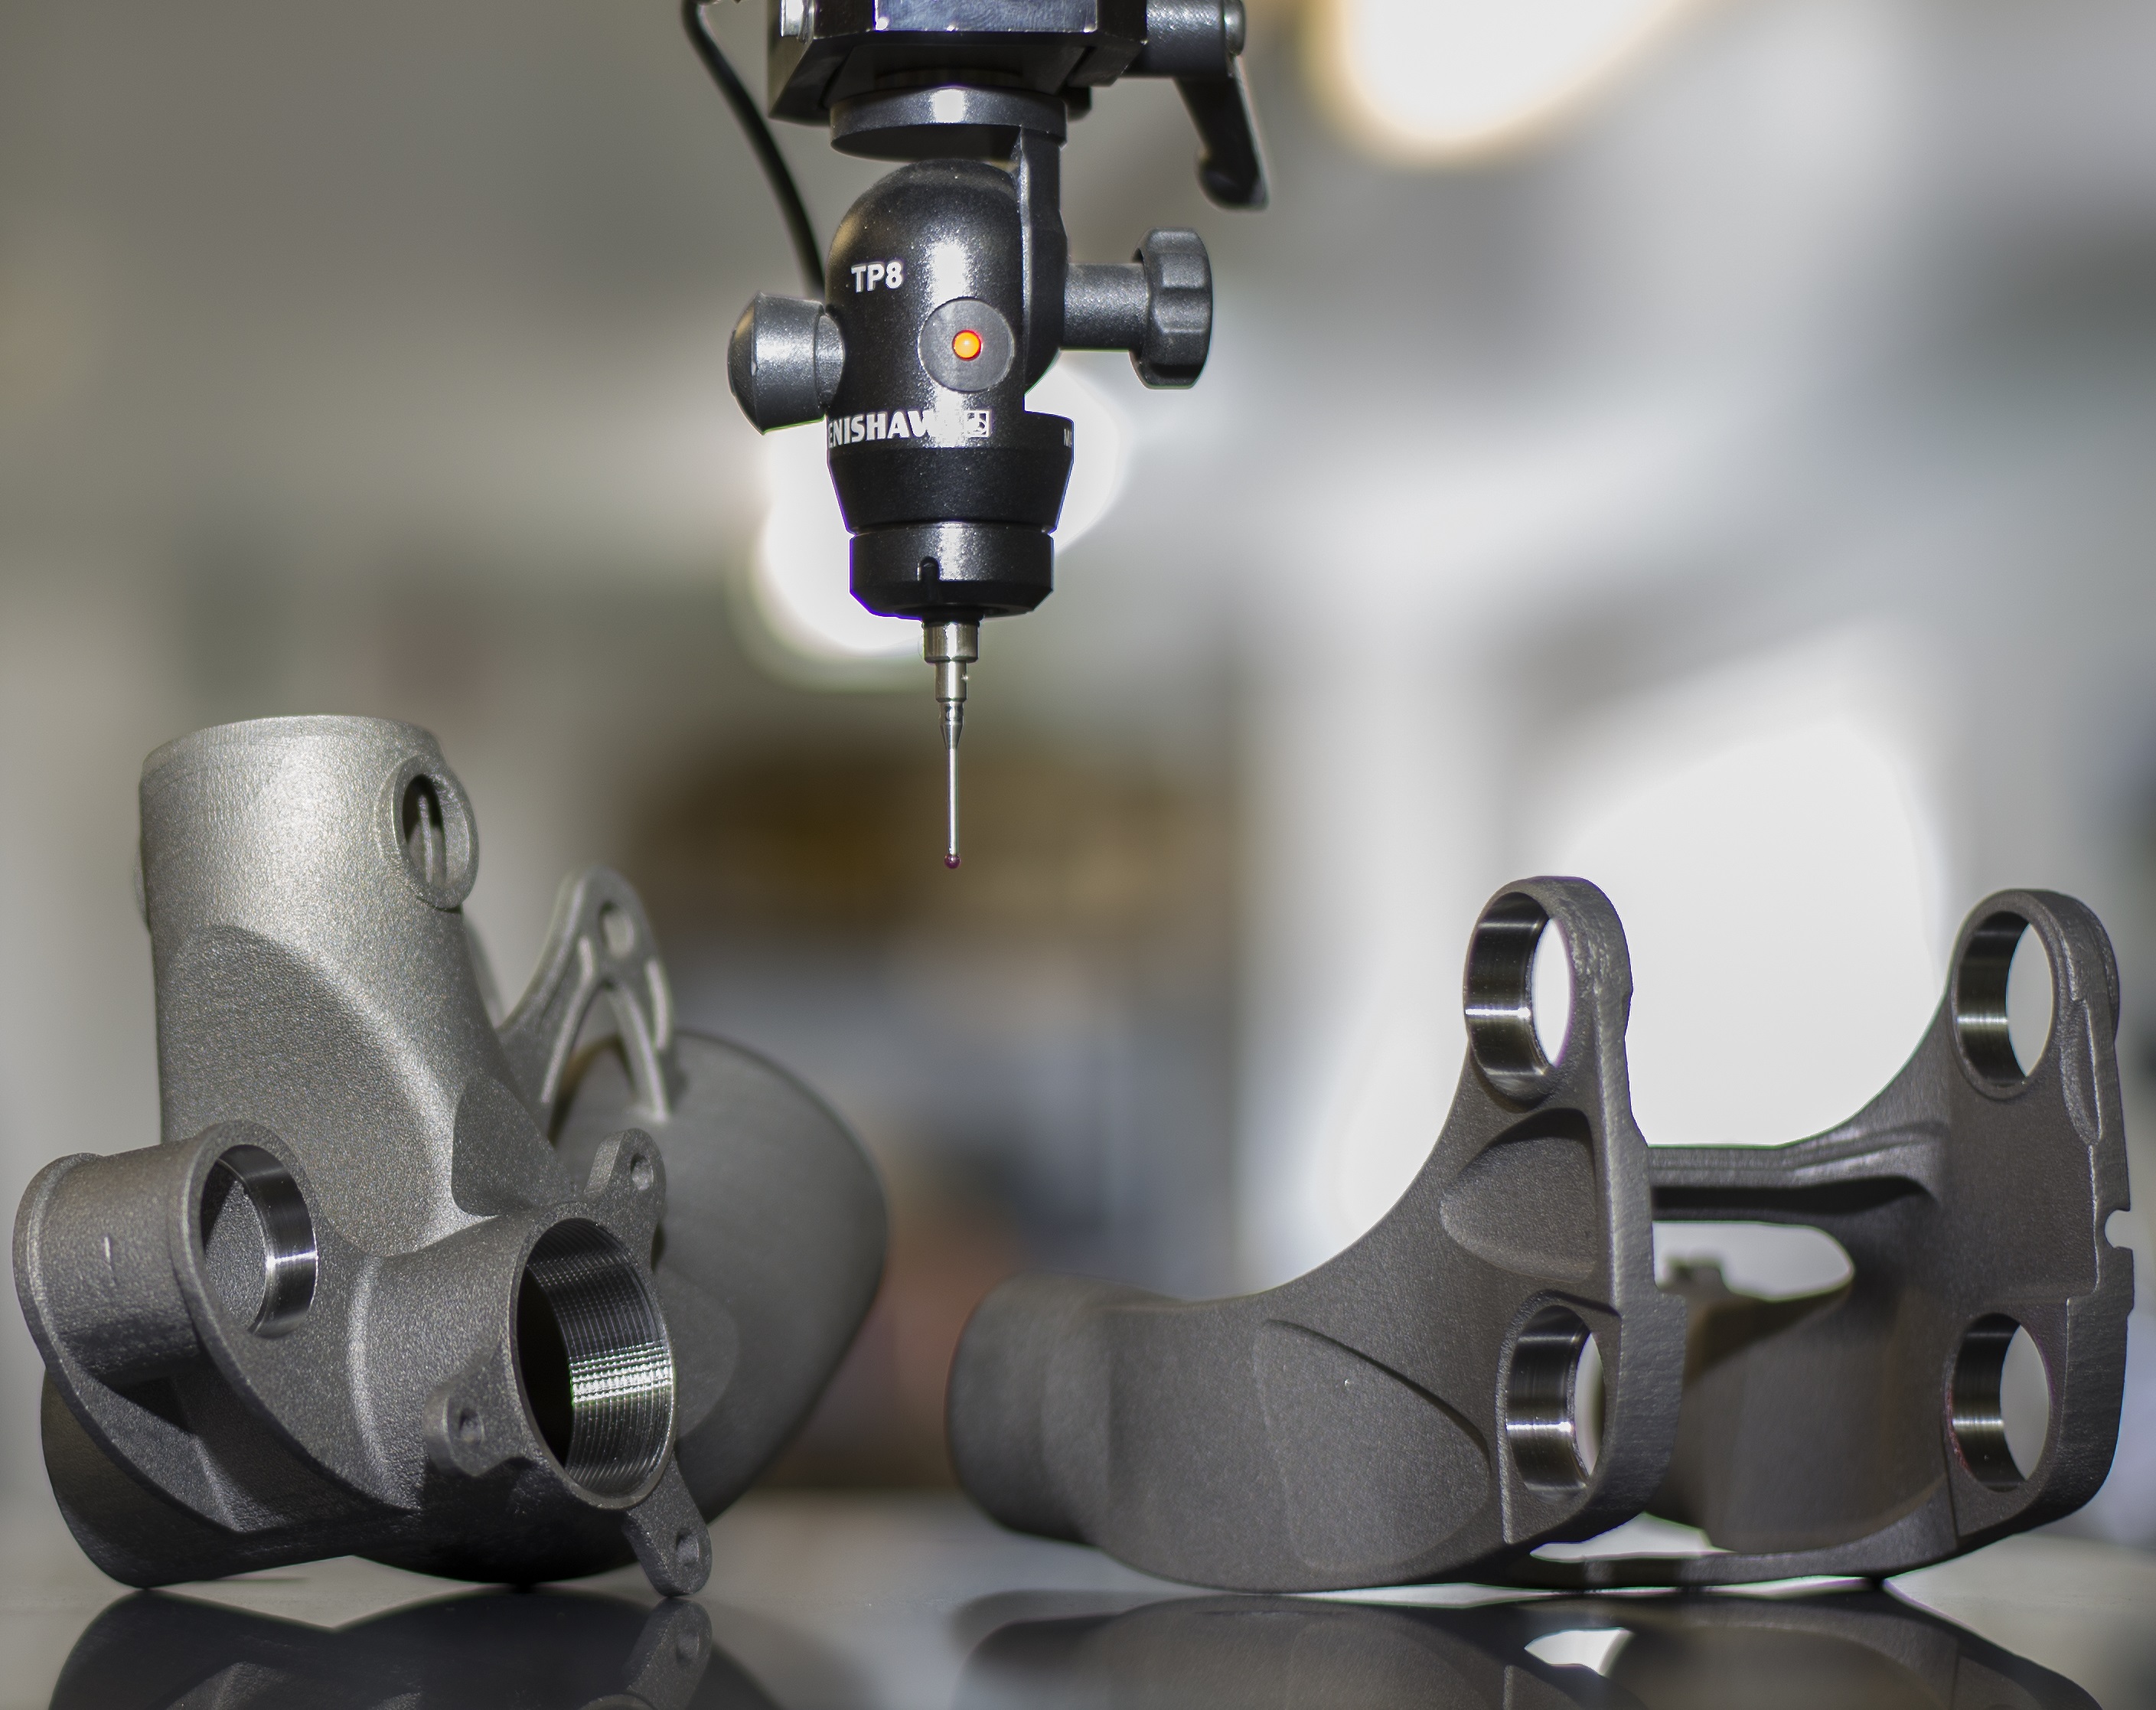 Robot Bike Co. - The final stage in the production of the titanium parts is inspection using Renishaw probes